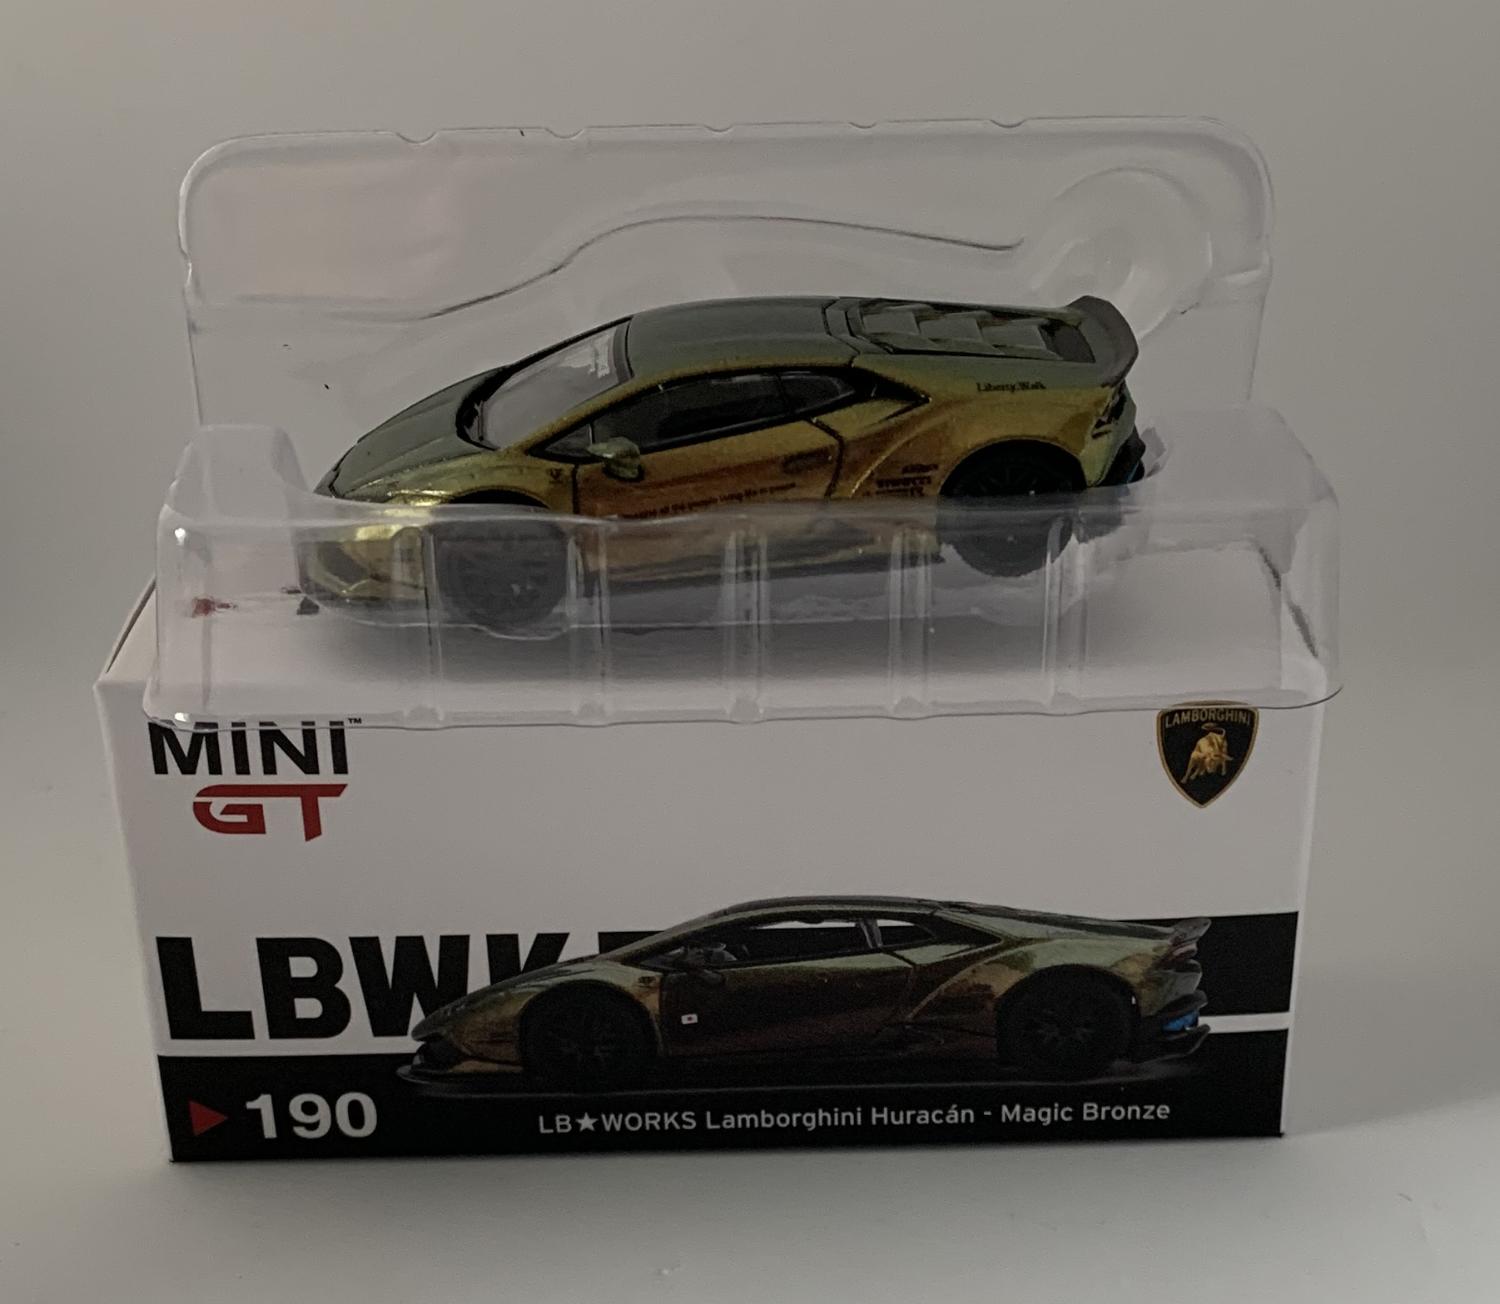 A good reproduction of the Lamborghini Huracan with detail throughout, all authentically recreated. The model is presented in a box, the car is approx. 7 cm long and the box is 10 cm long